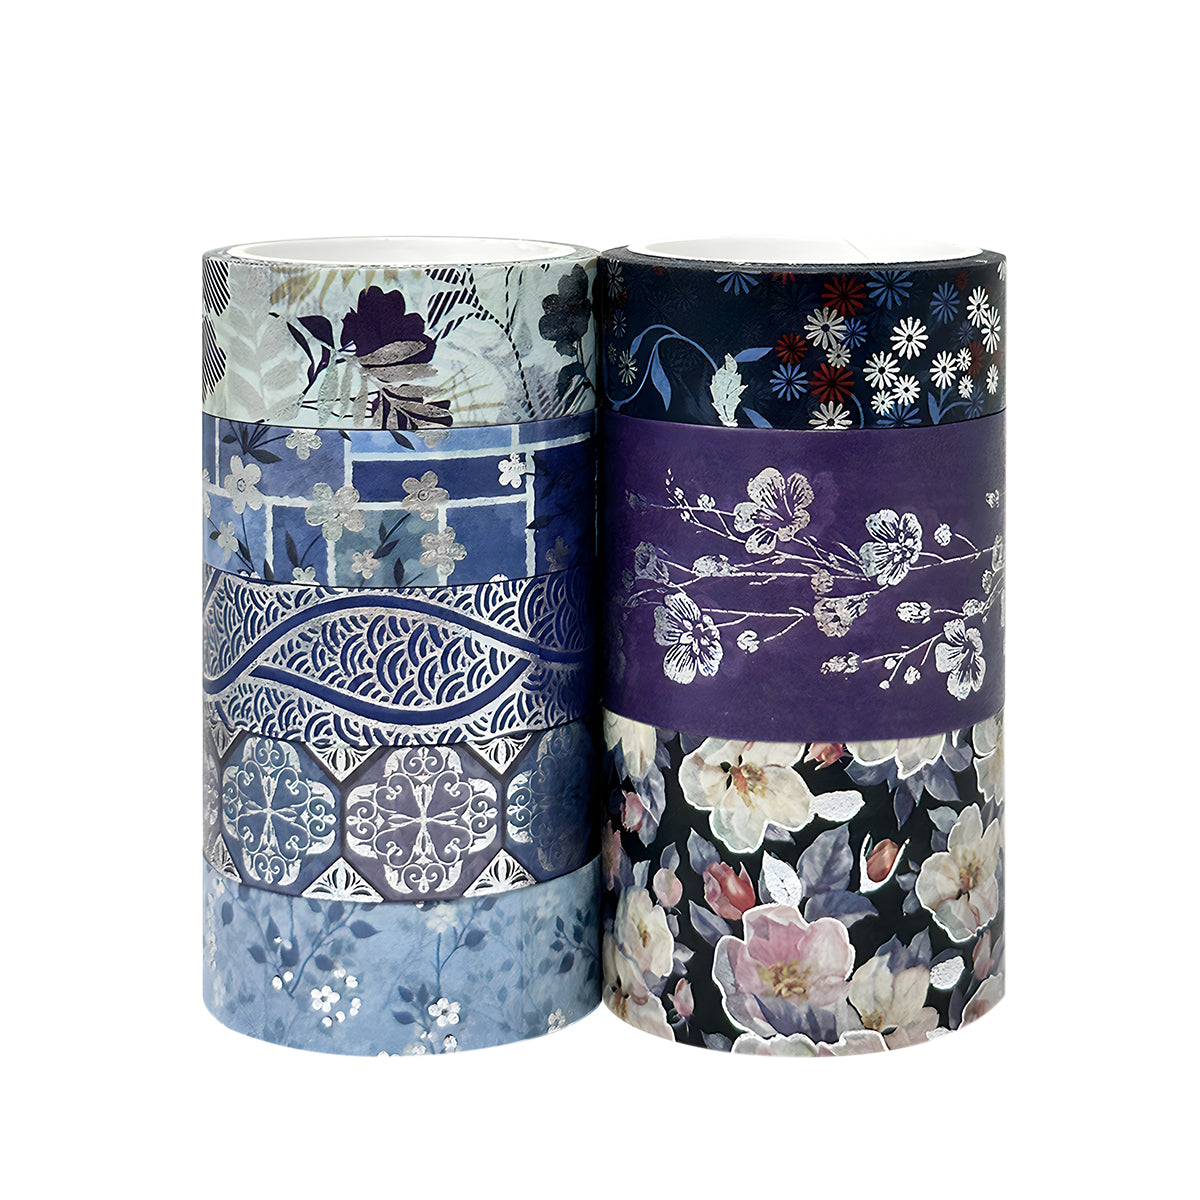 Wrapables Nature Metallic Foil Washi Tape Set for Scrapbooking, Stationery, Diary, Card Making, (8 Rolls), Cool Blue Floral